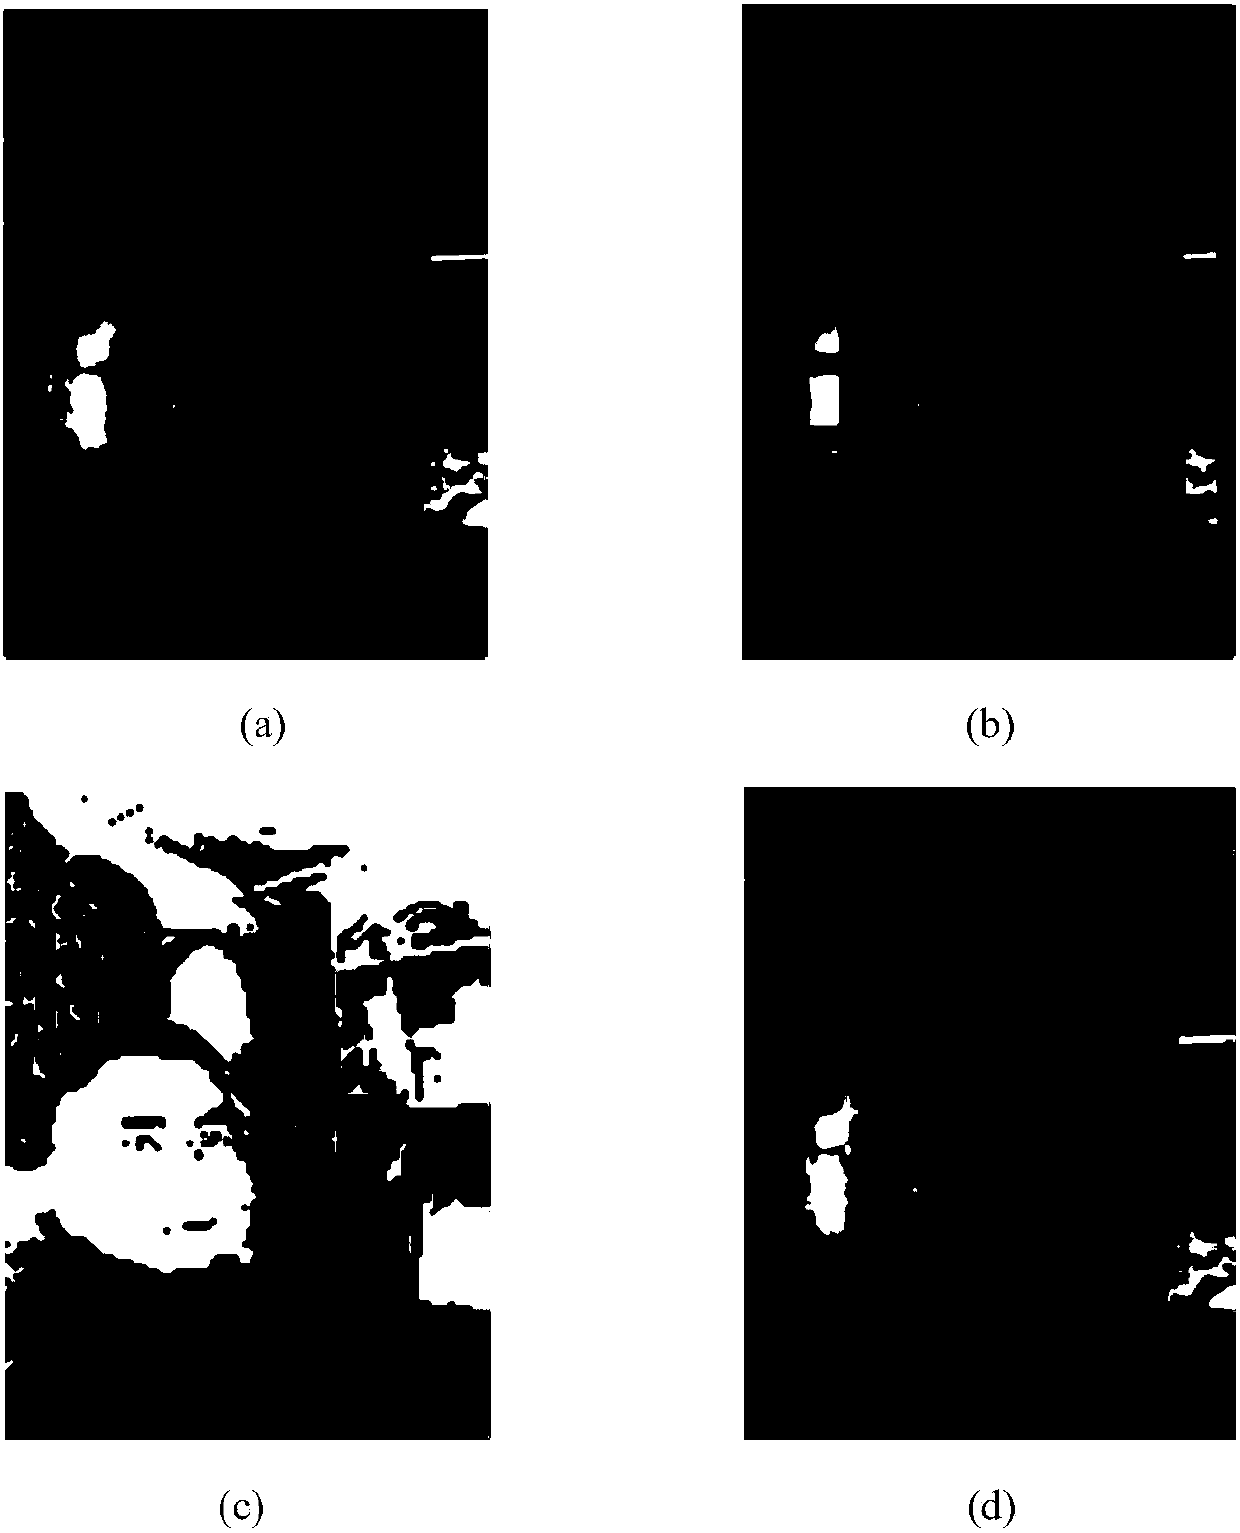 A Human Eye Positioning Method Based on Point-by-Point Scanning